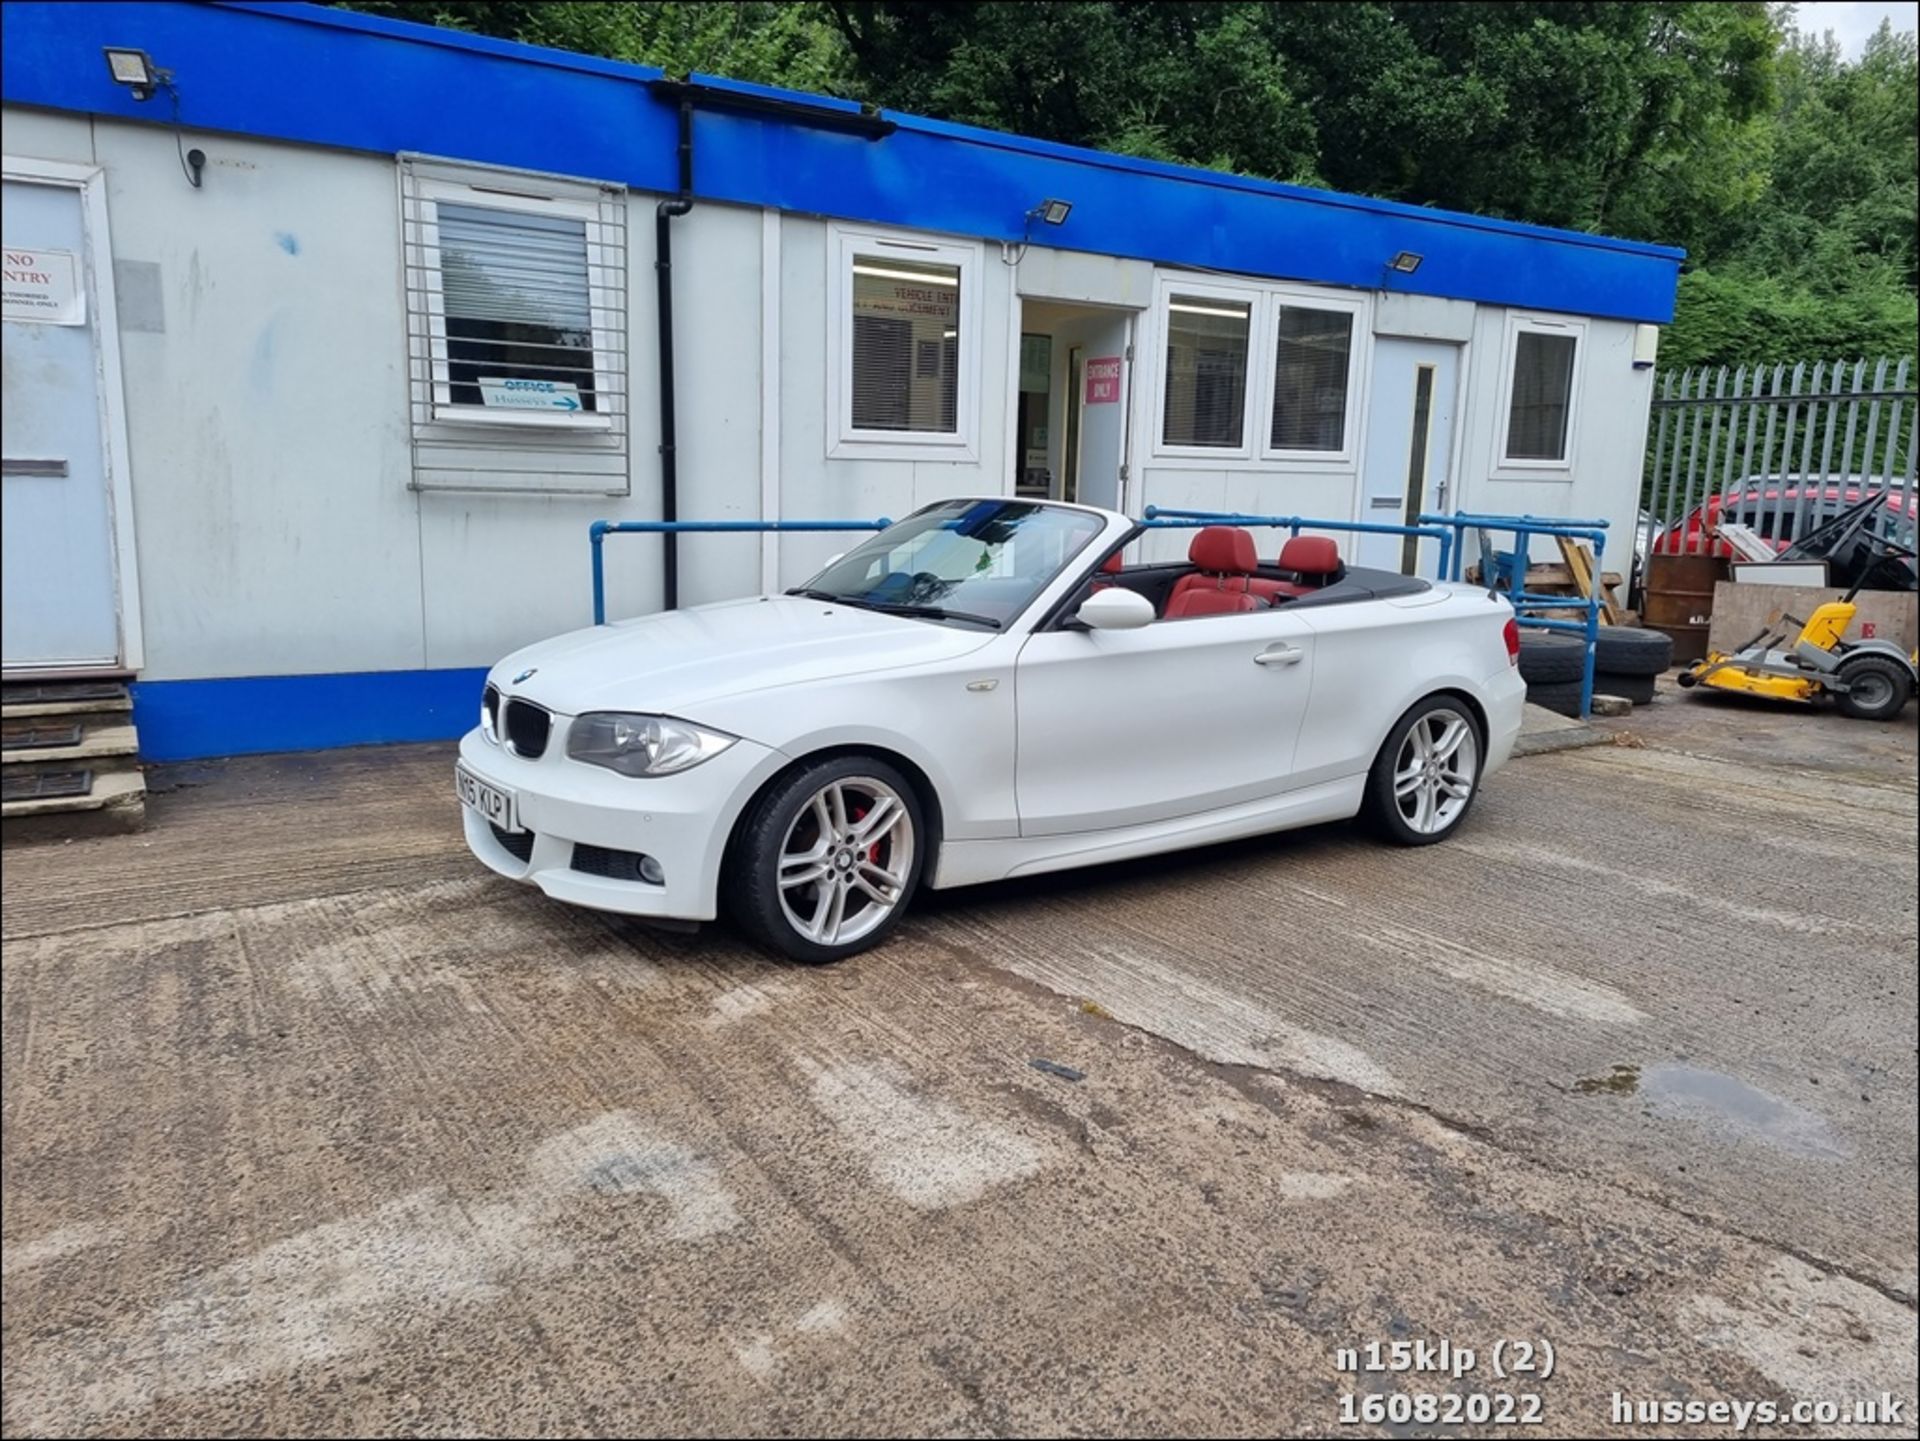 2008 BMW 118I M SPORT - 1995cc 2dr Convertible (White, 97k) - Image 2 of 19